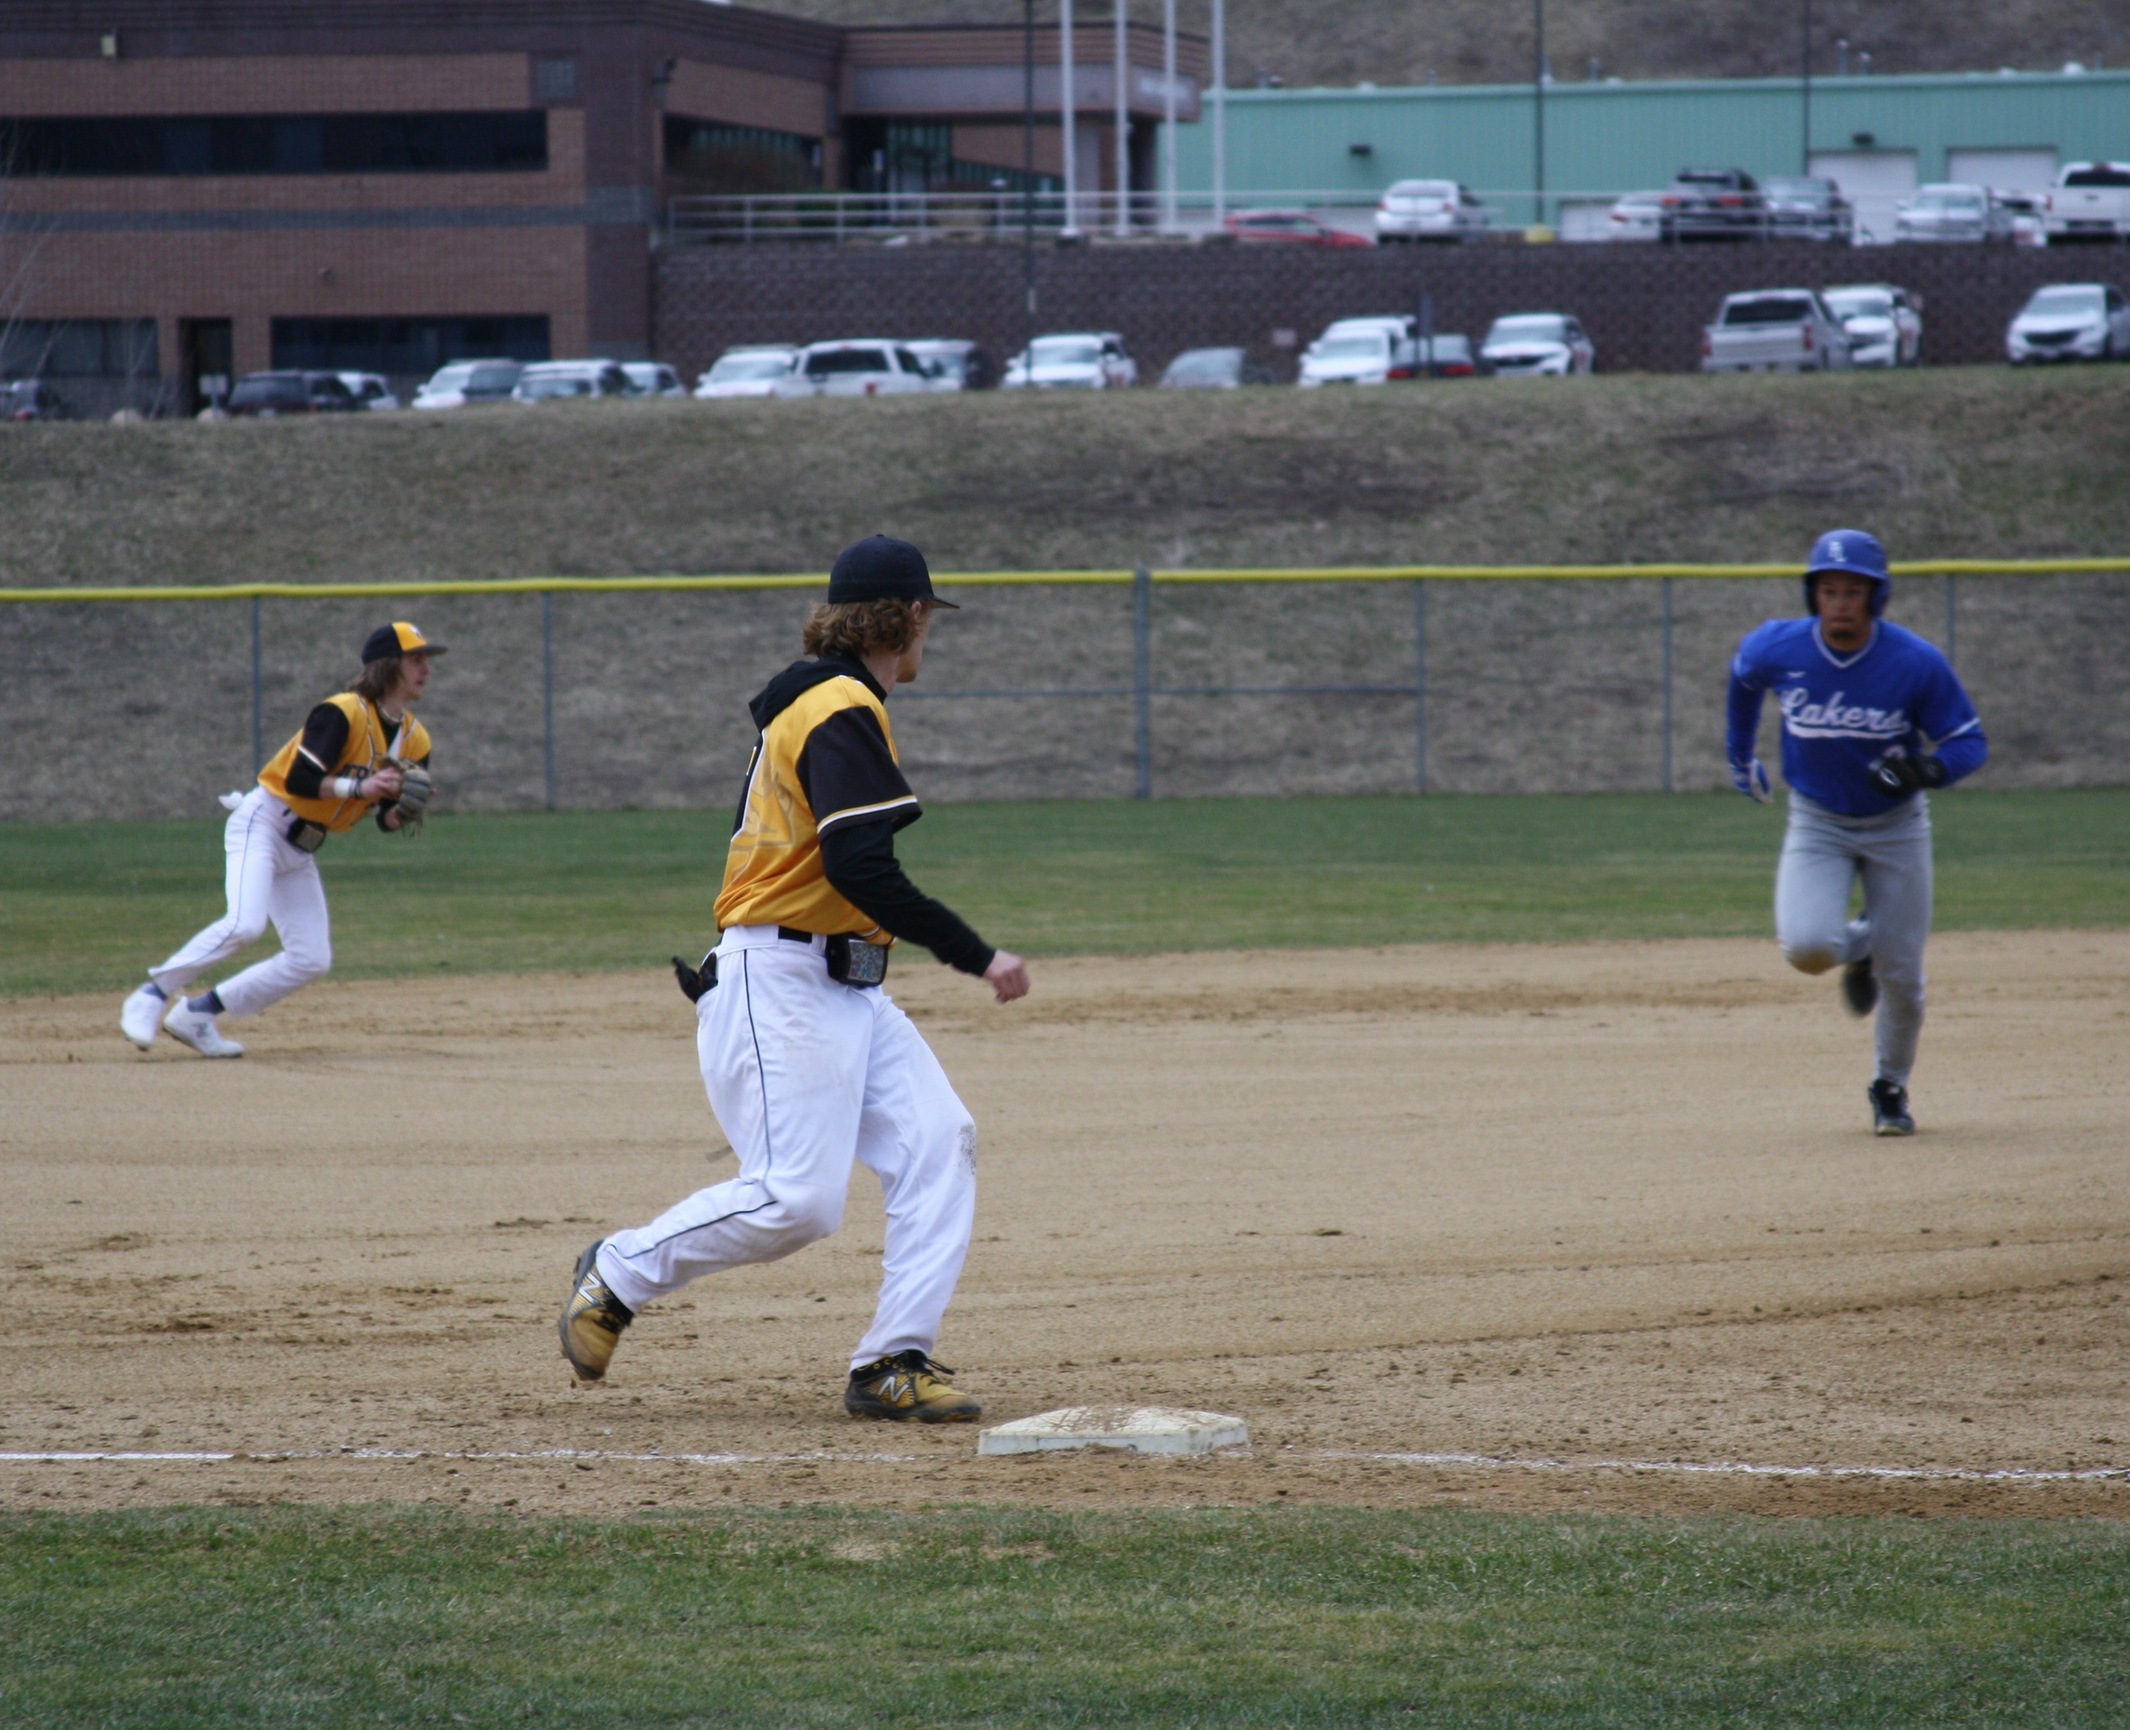 Laker running to 3rd